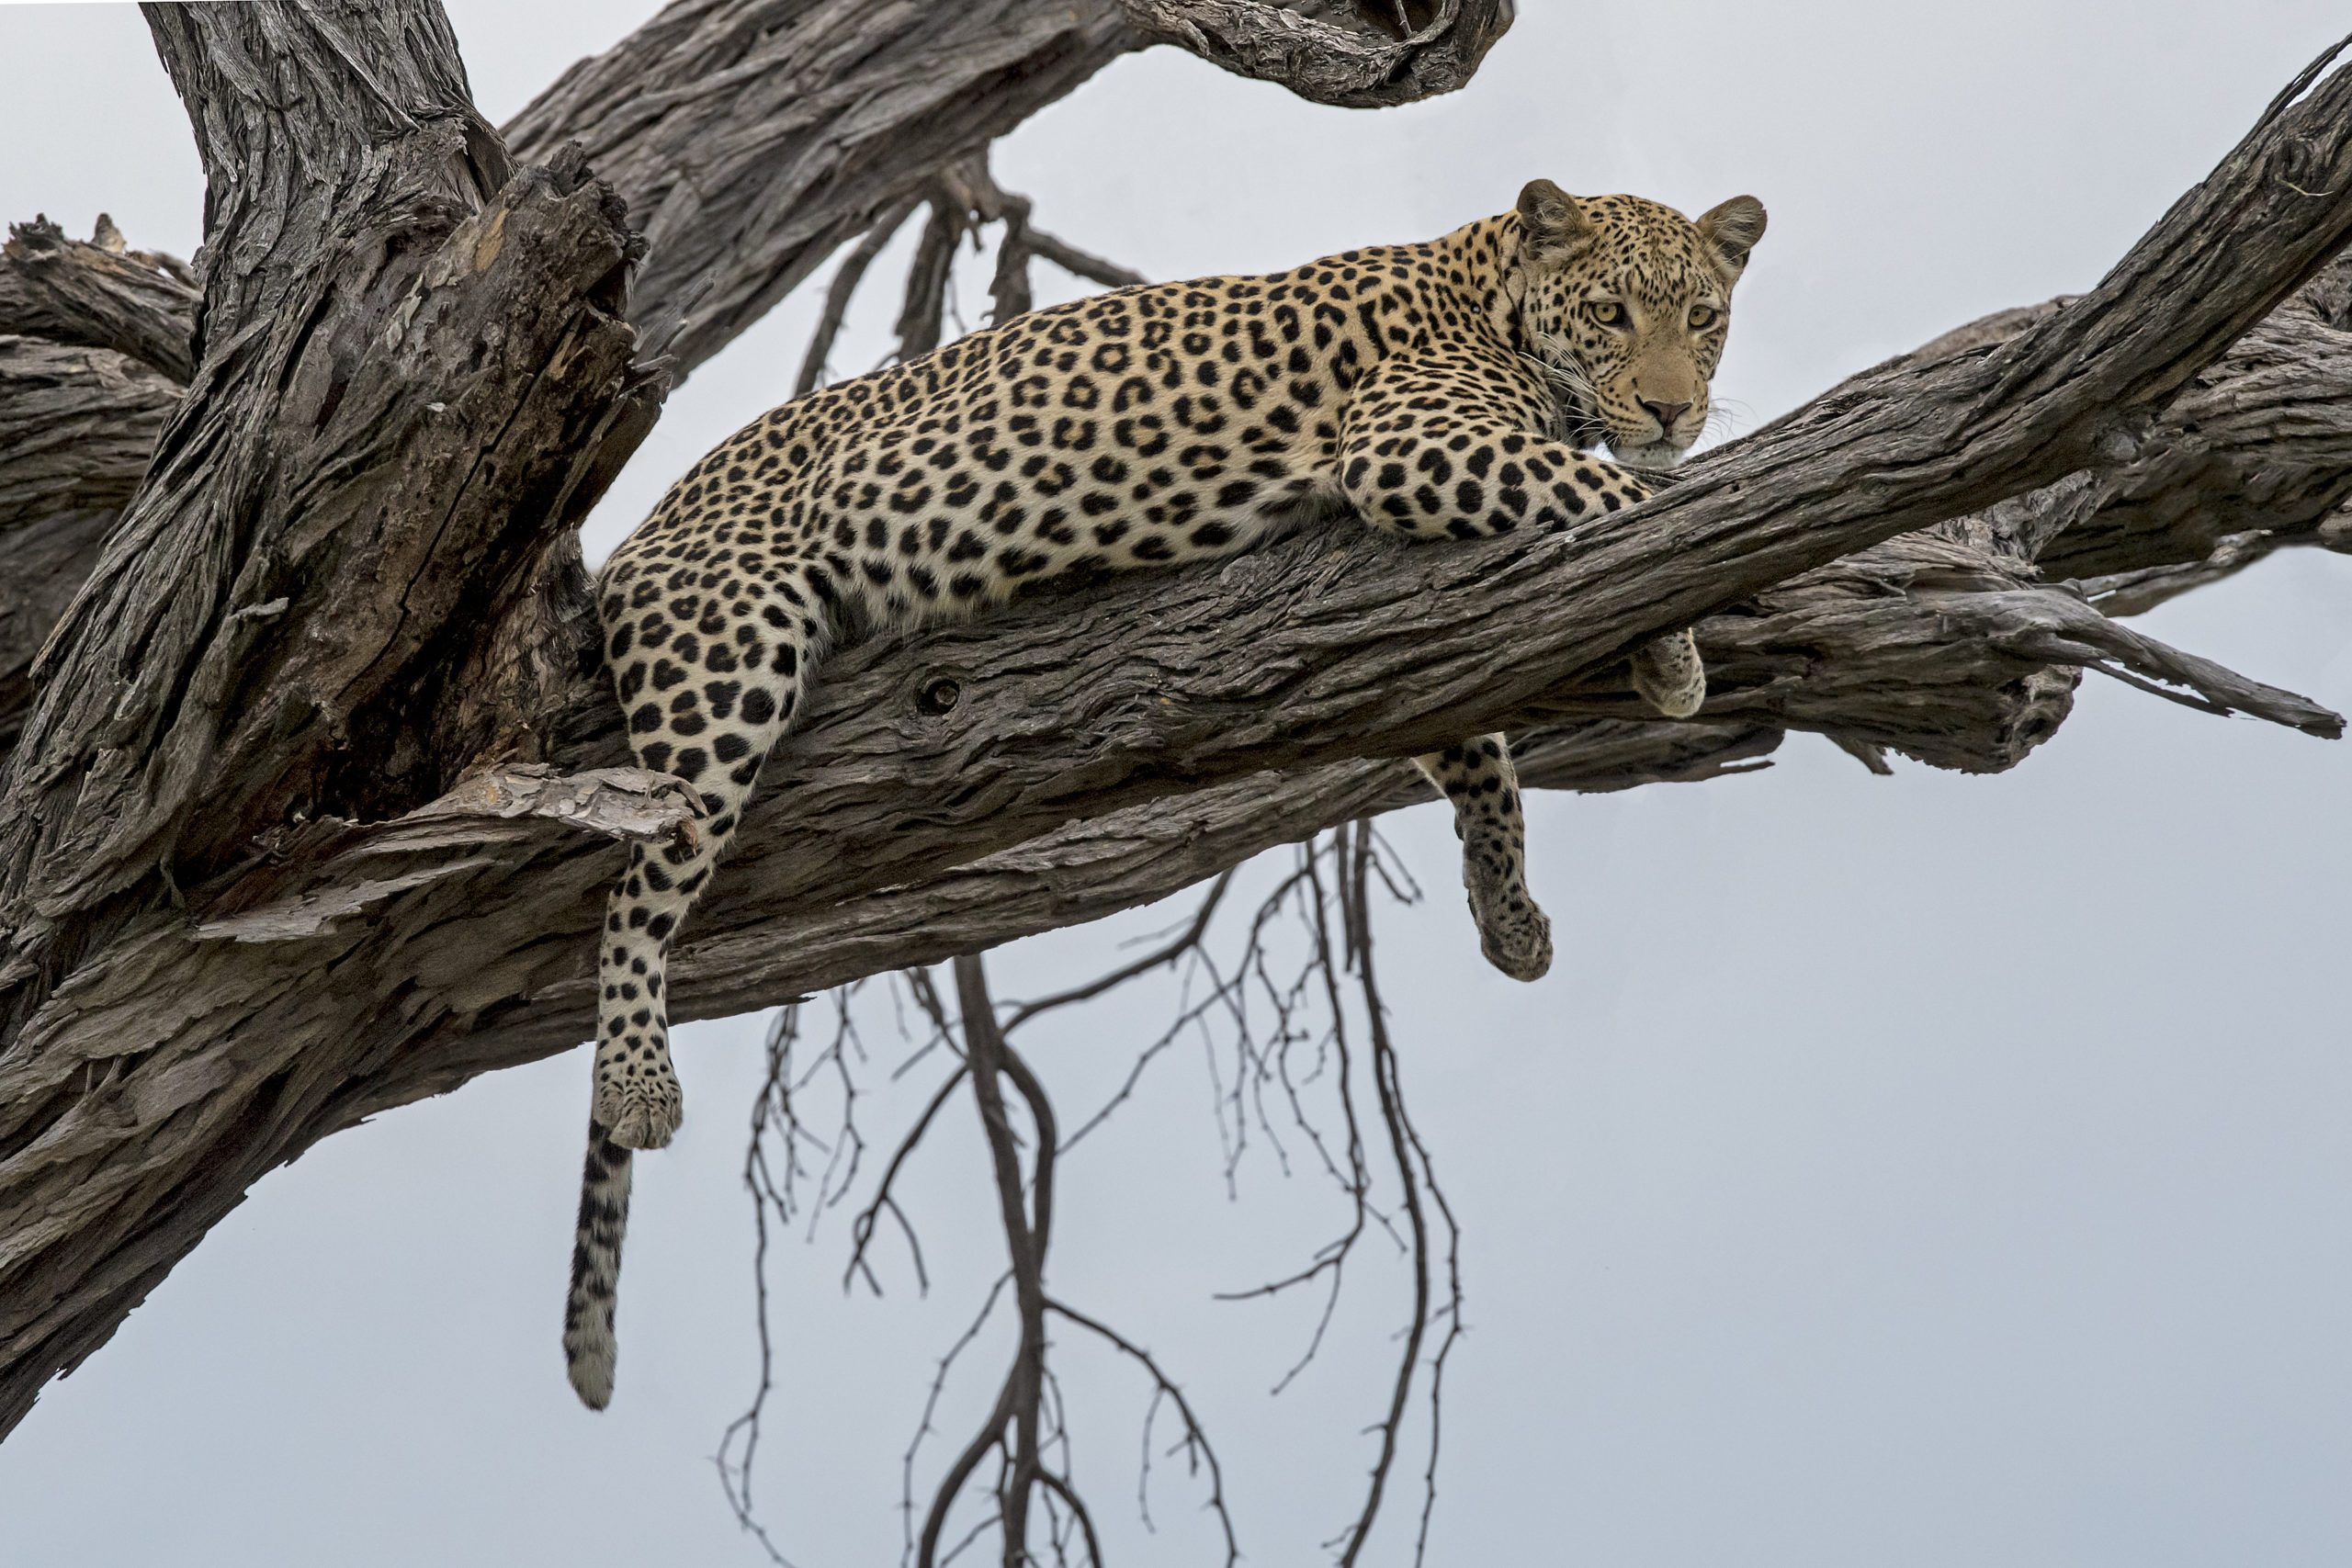 Witness extraordinary Botswana creatures like this tree-lounging leopard when you take a tailor-made holiday with Alfred&.